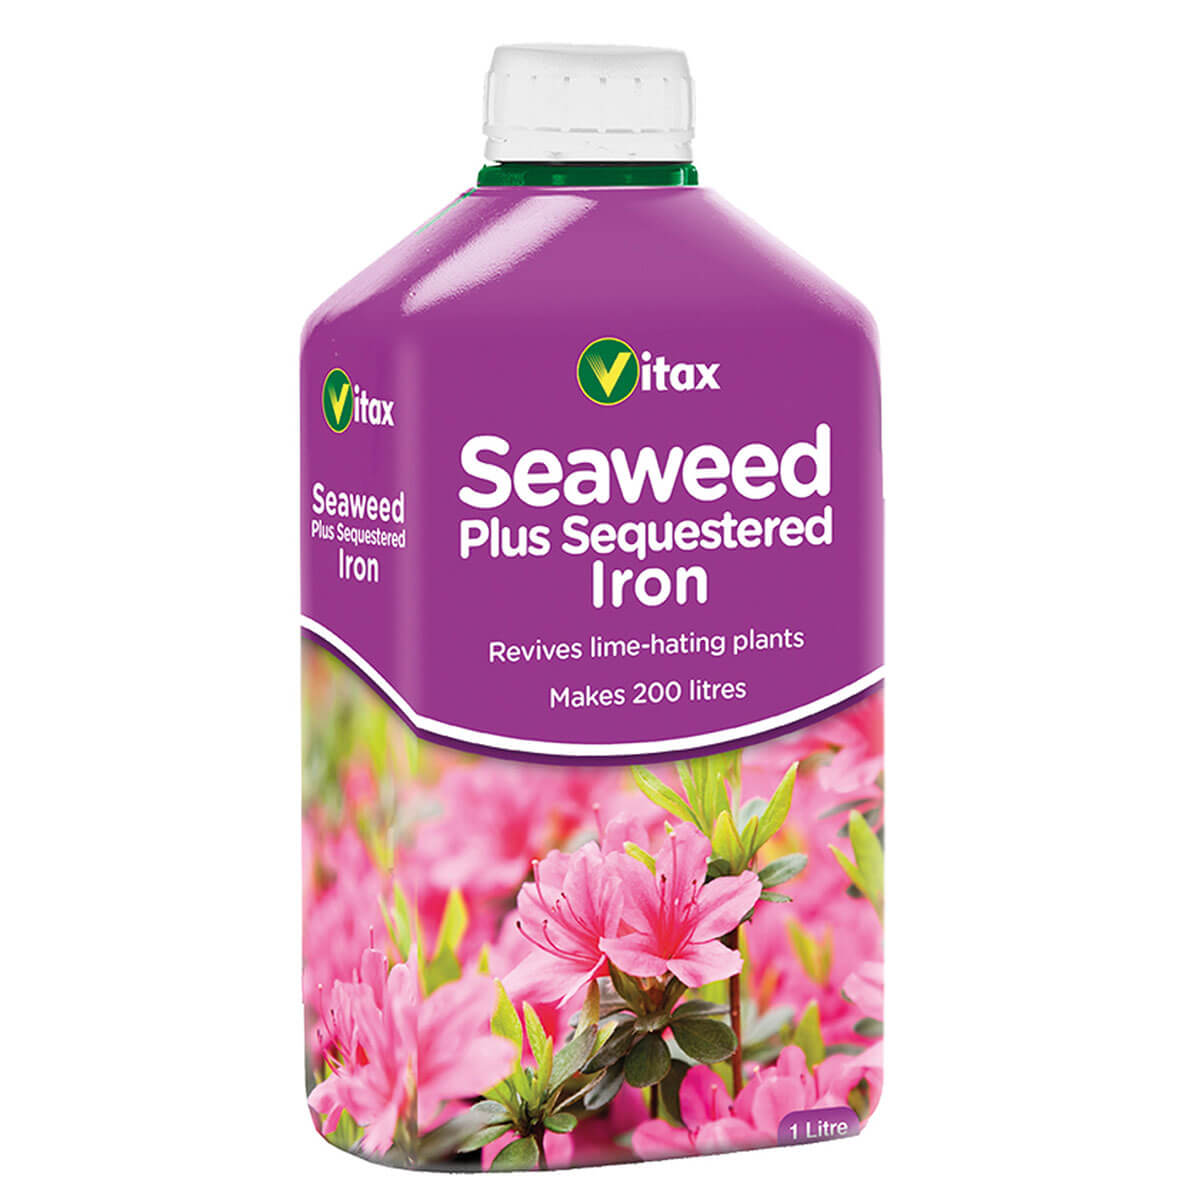 Seaweed plus Sequestered Iron 1 litre Bottle